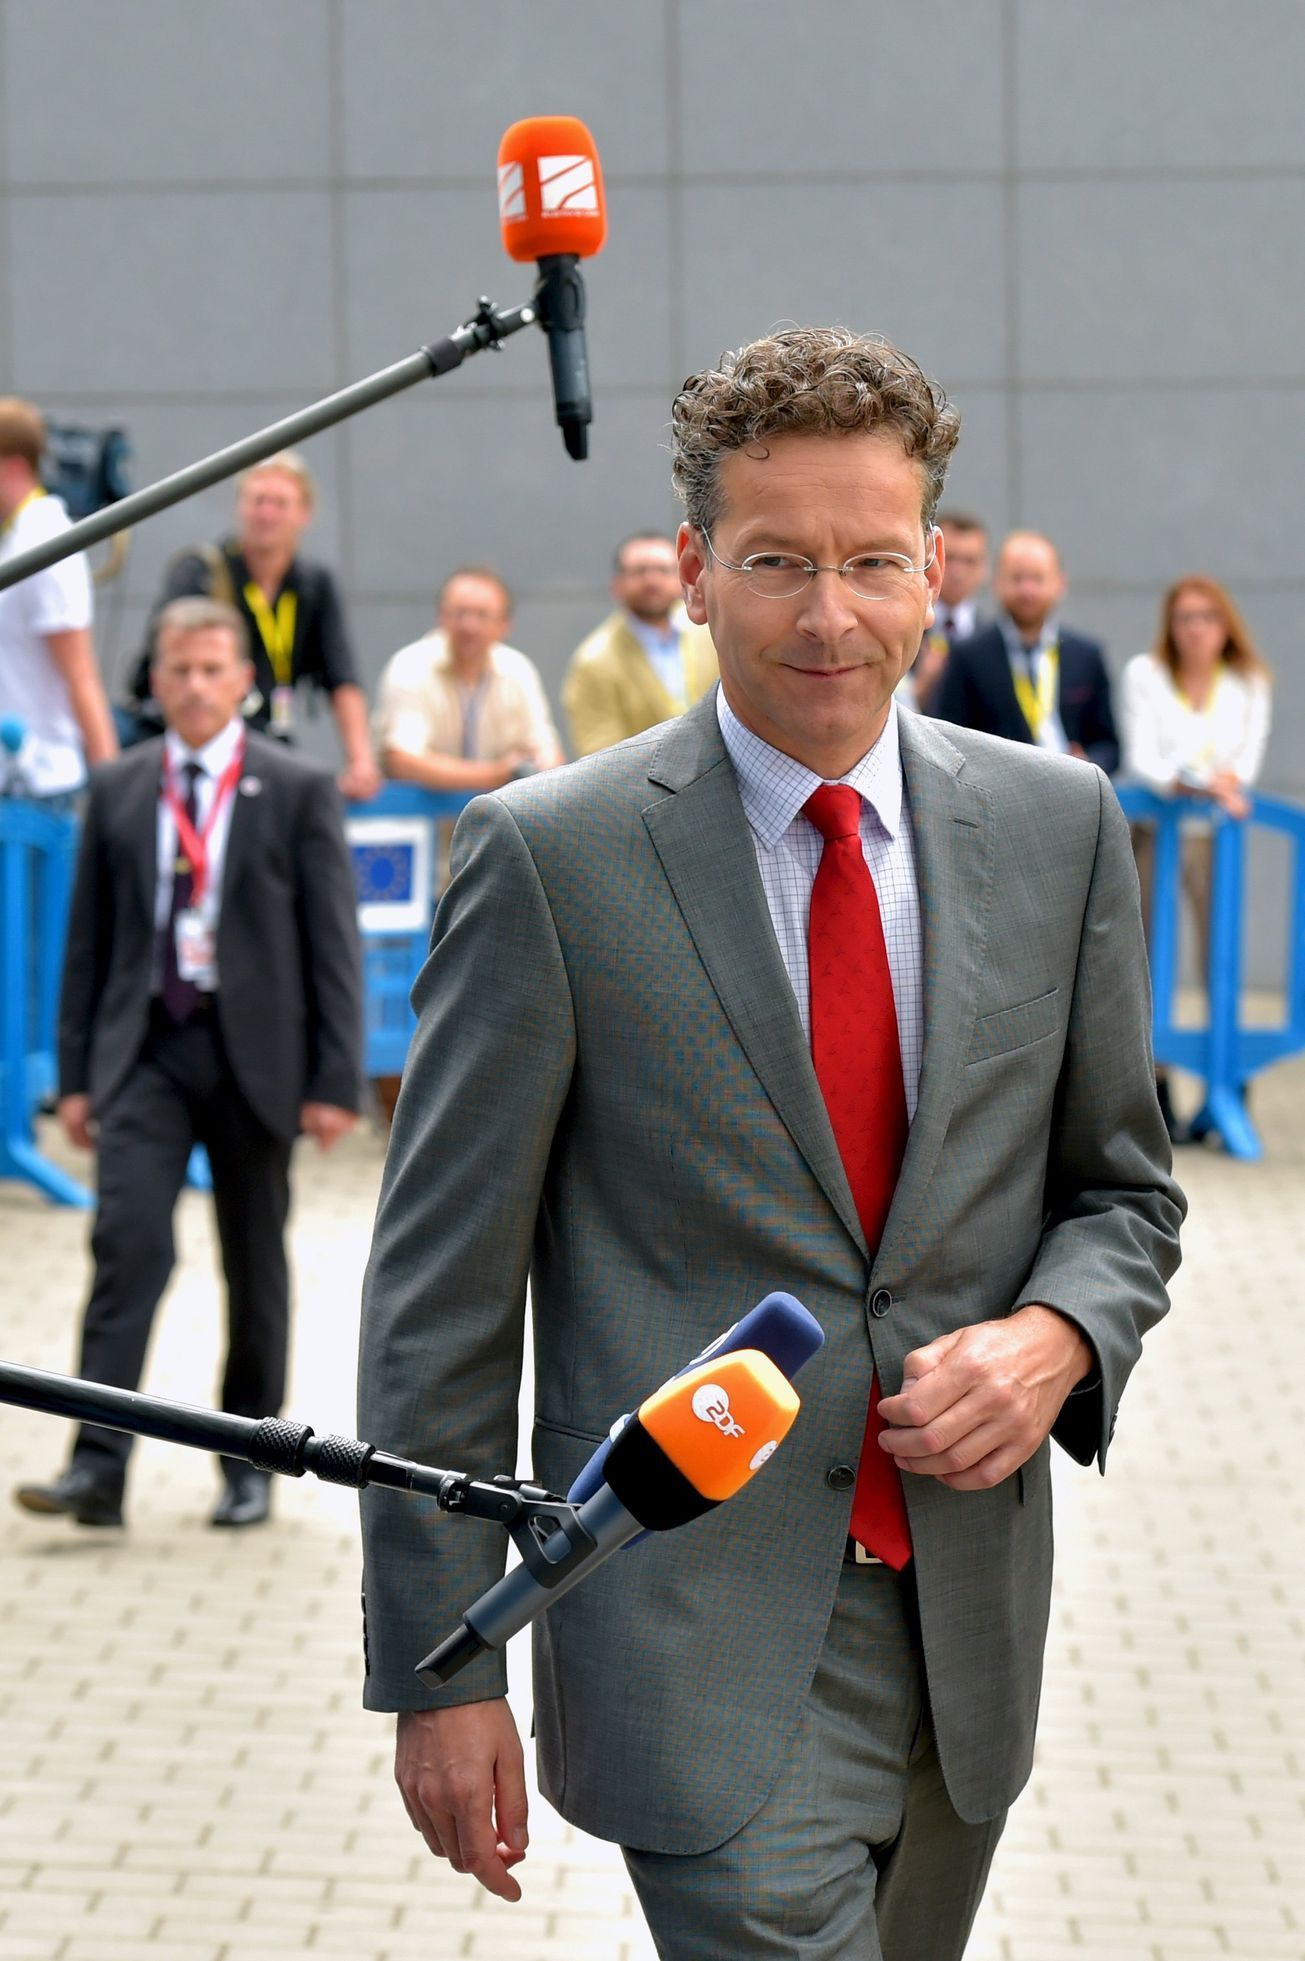 Eurogroup President Dijsselbloem arrives at a euro zone finance ministers meeting on the situation in Greece in Brussels, Belgium